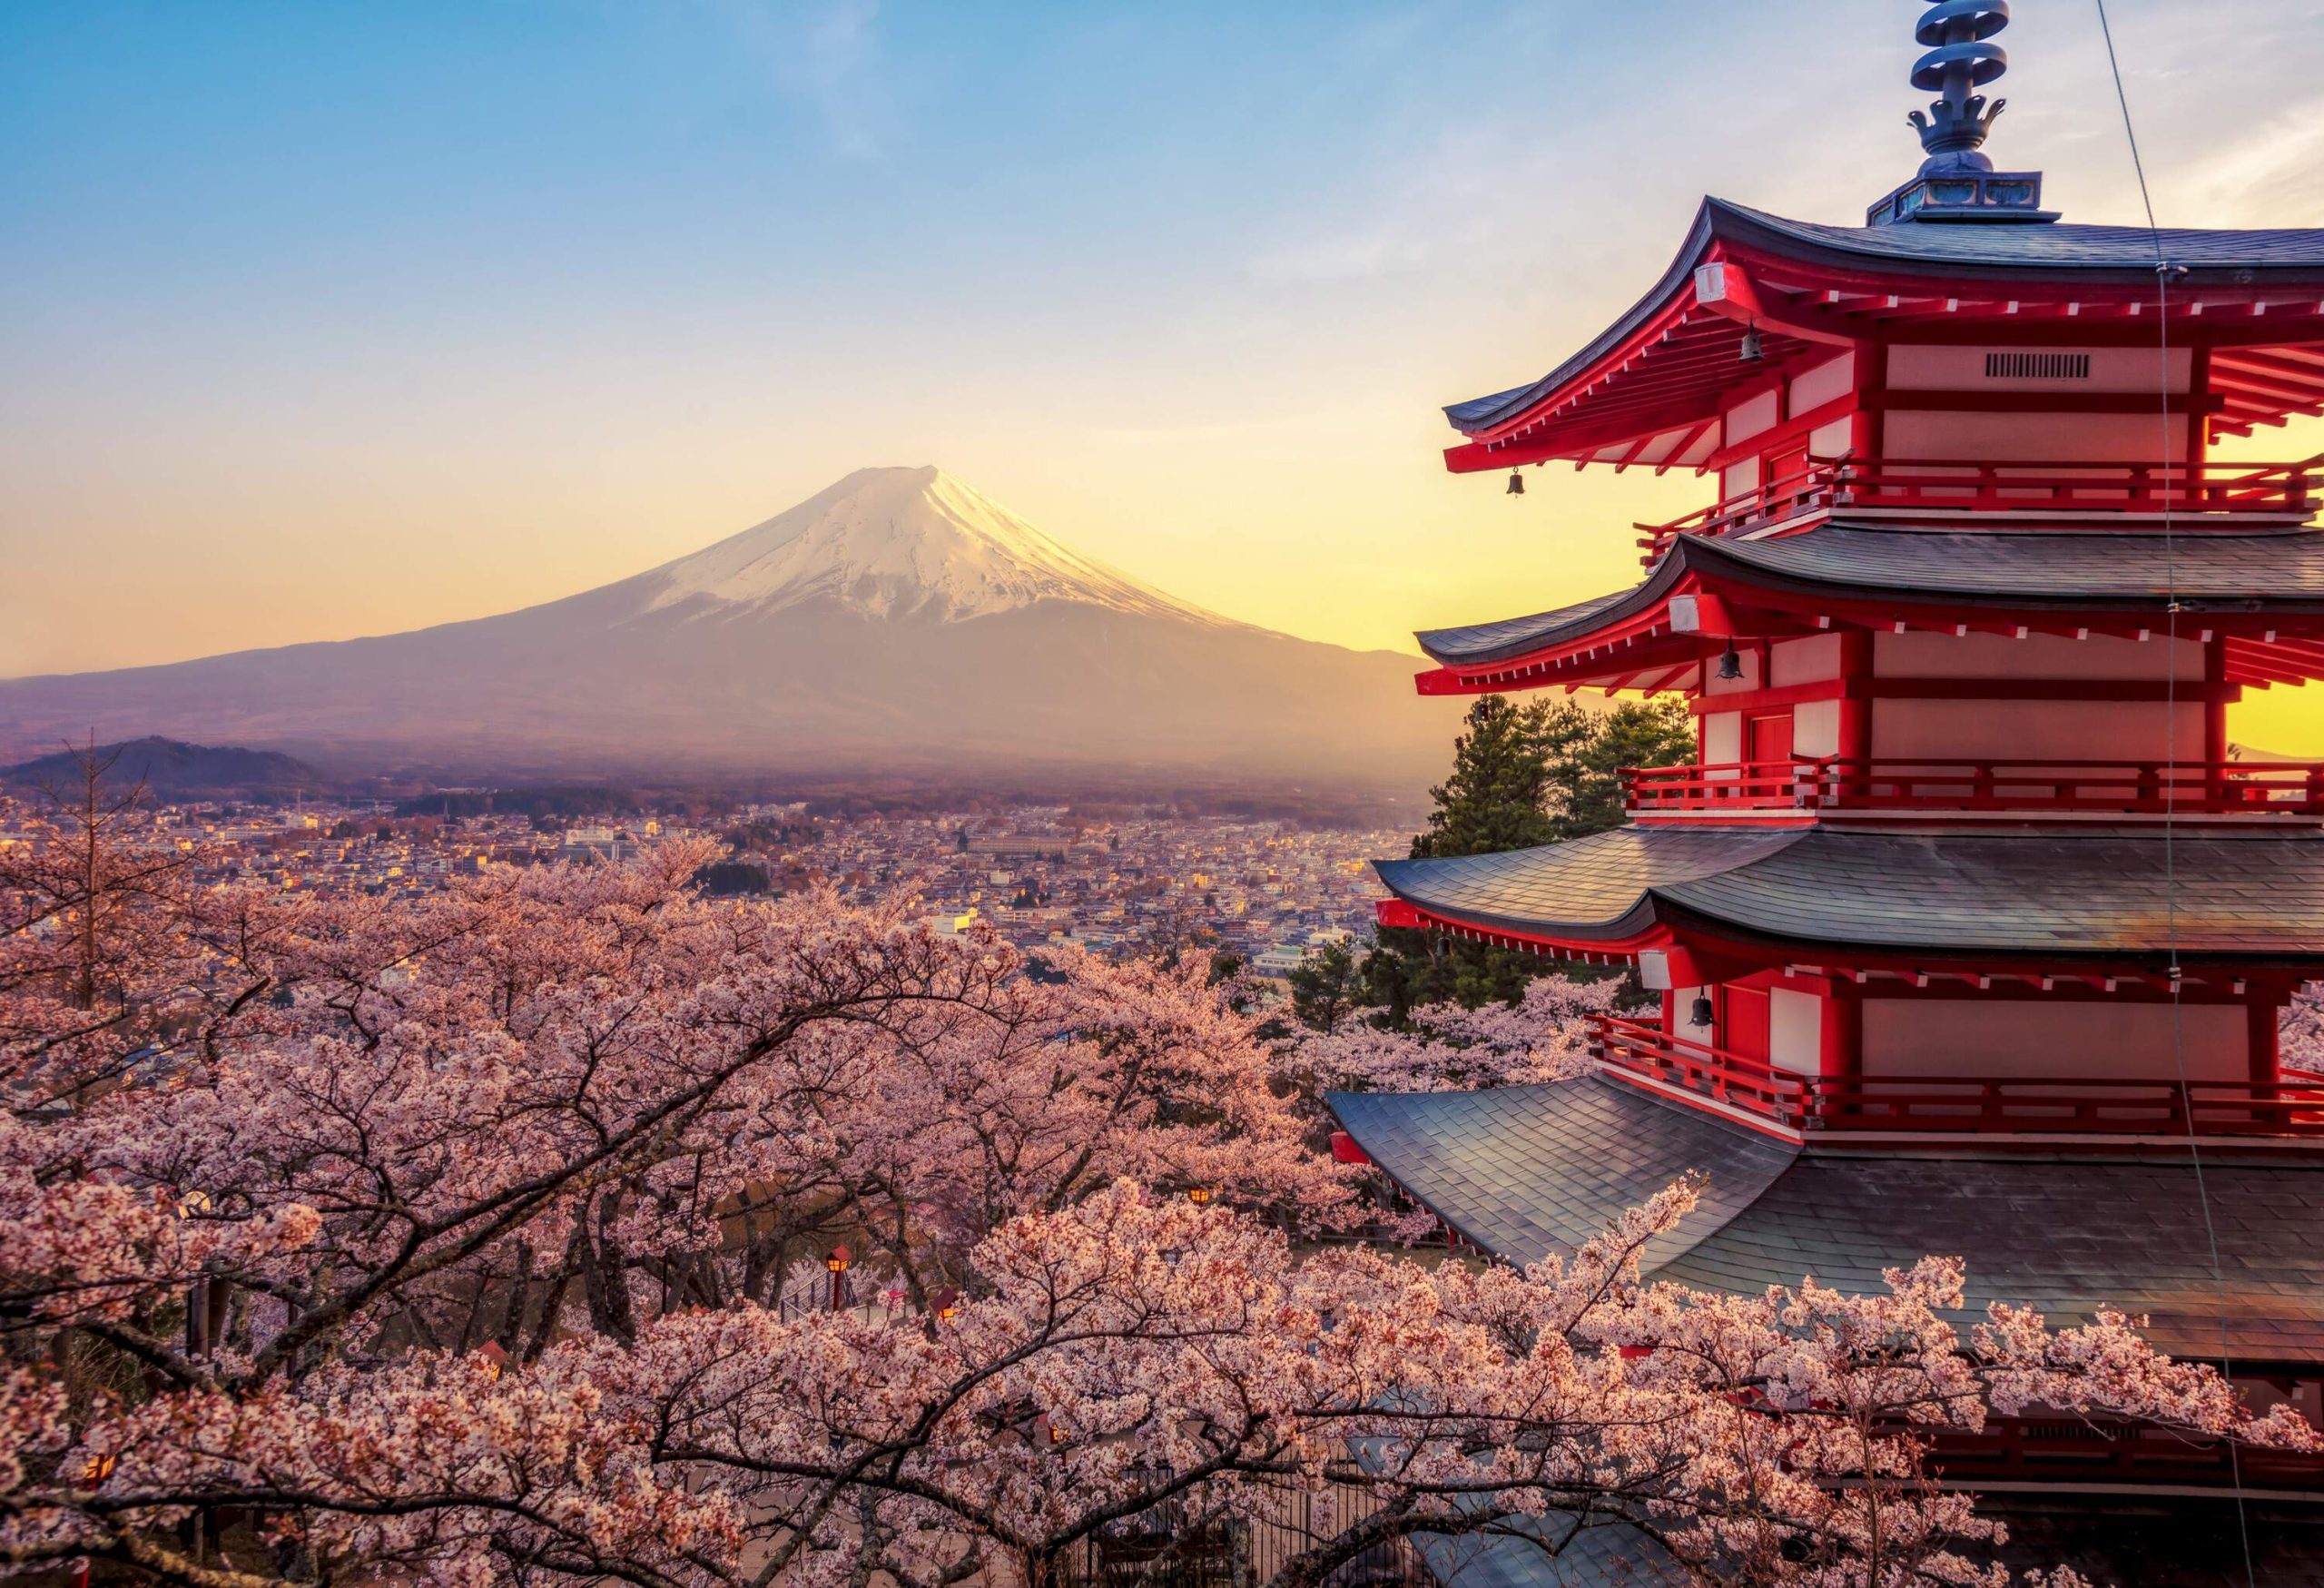 A pagoda rising over cherry blossom trees with Mt. Fuji in the background.